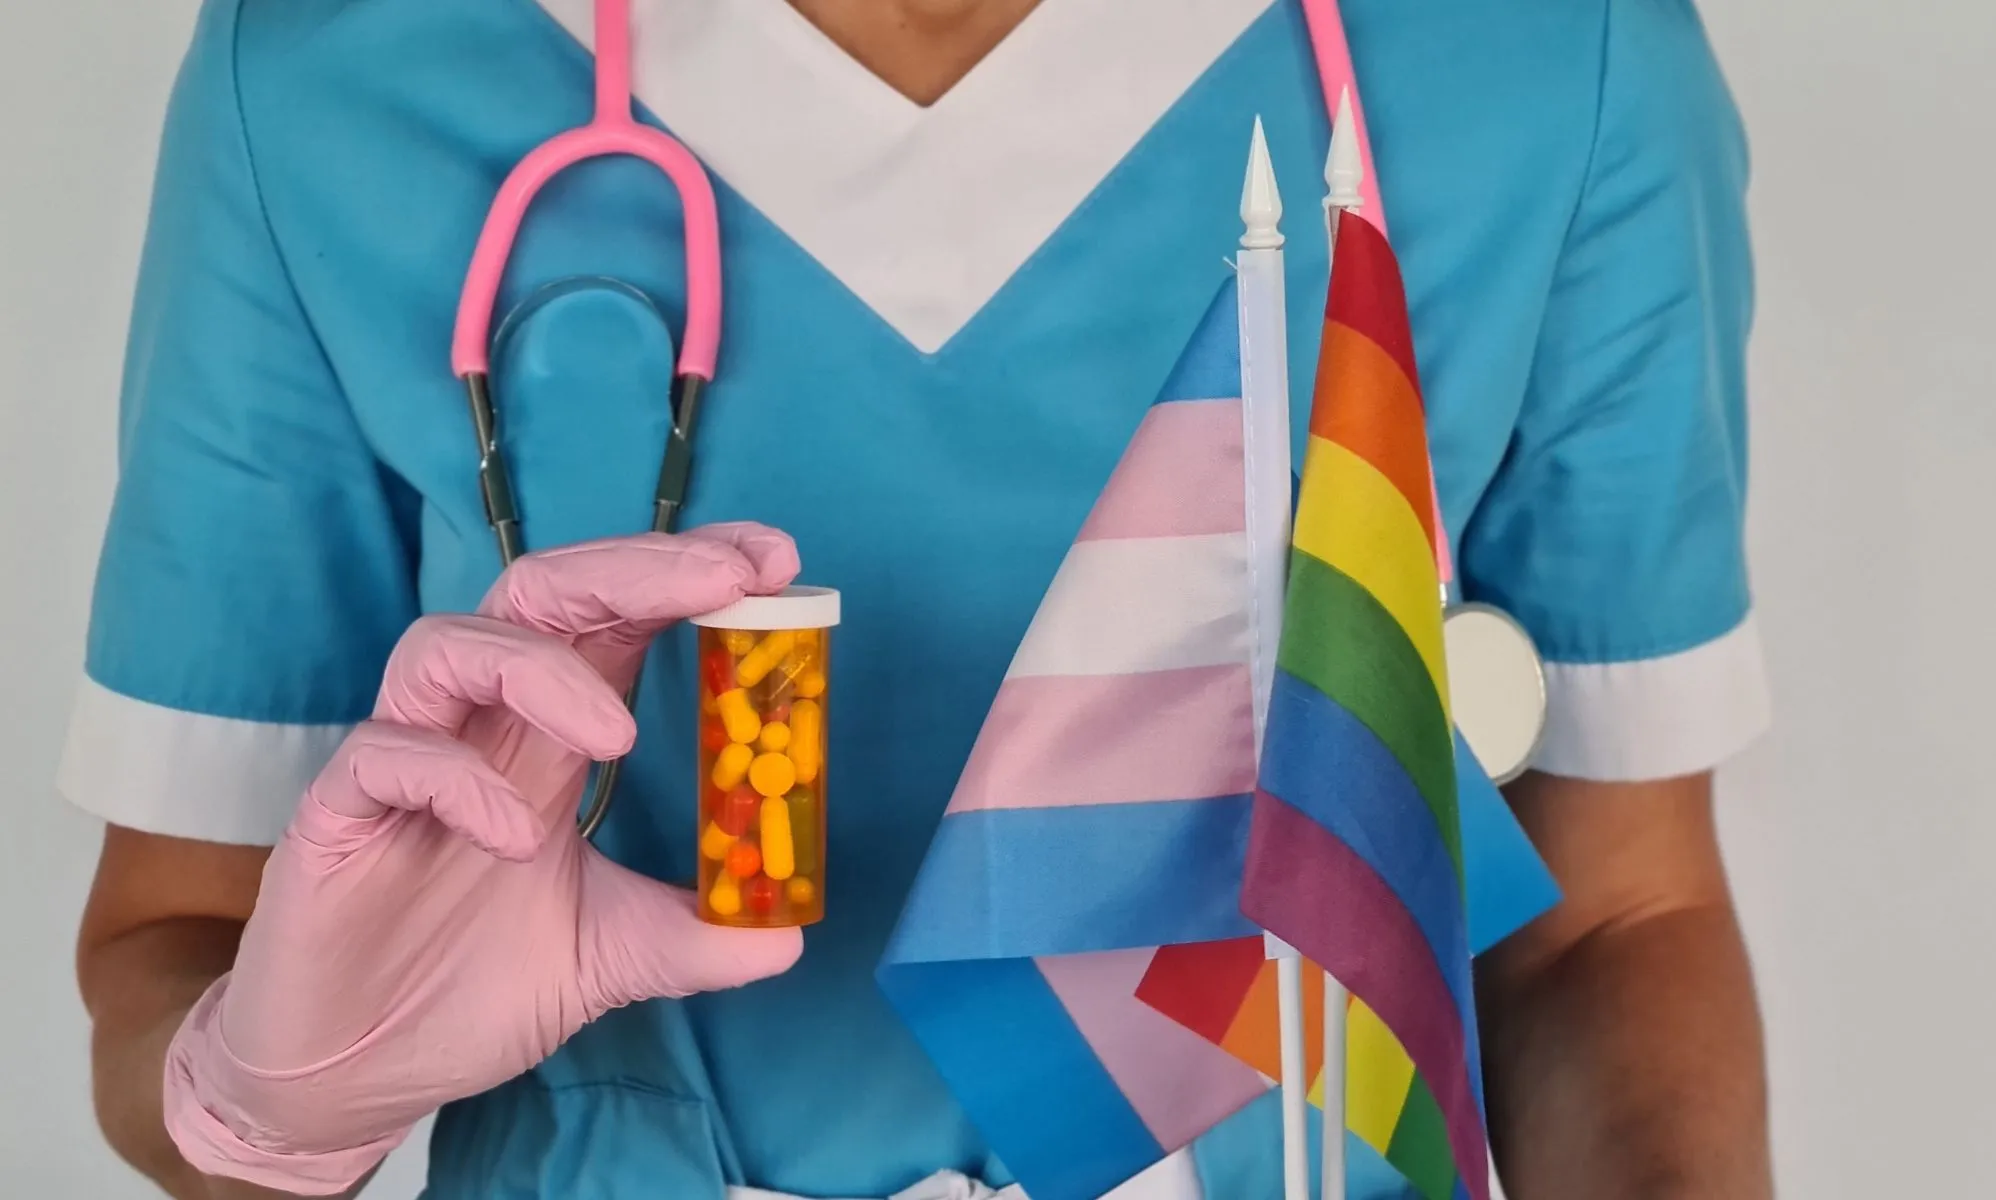 Doctors question Cass report’s dismissal of ‘poor quality’ trans healthcare research